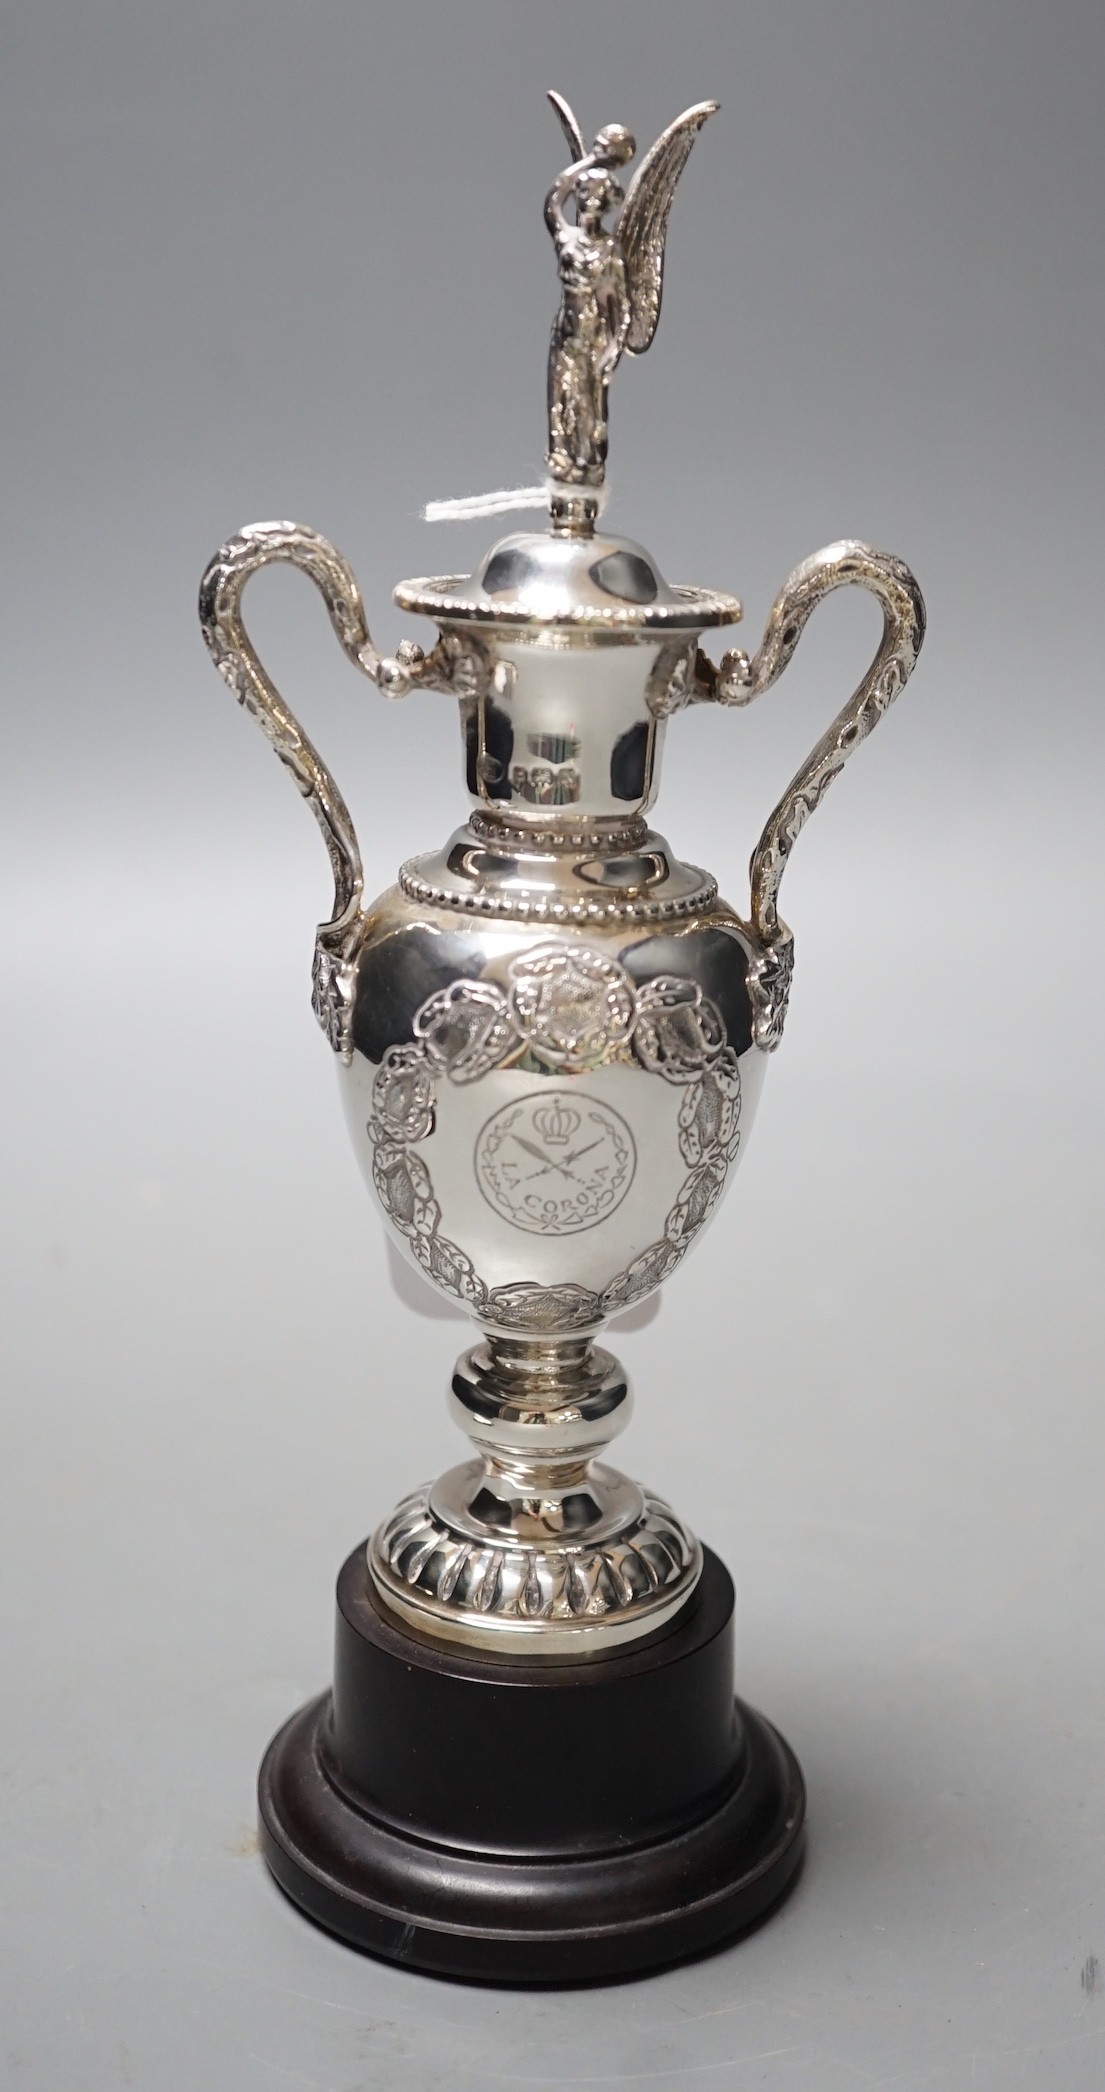 A George VI silver two handled golfing related presentation trophy cup and cover, Alexander Clark Co. Ltd, Birmingham, 1937, 18.3cm, 4.9oz, on wooden socle.                                                                